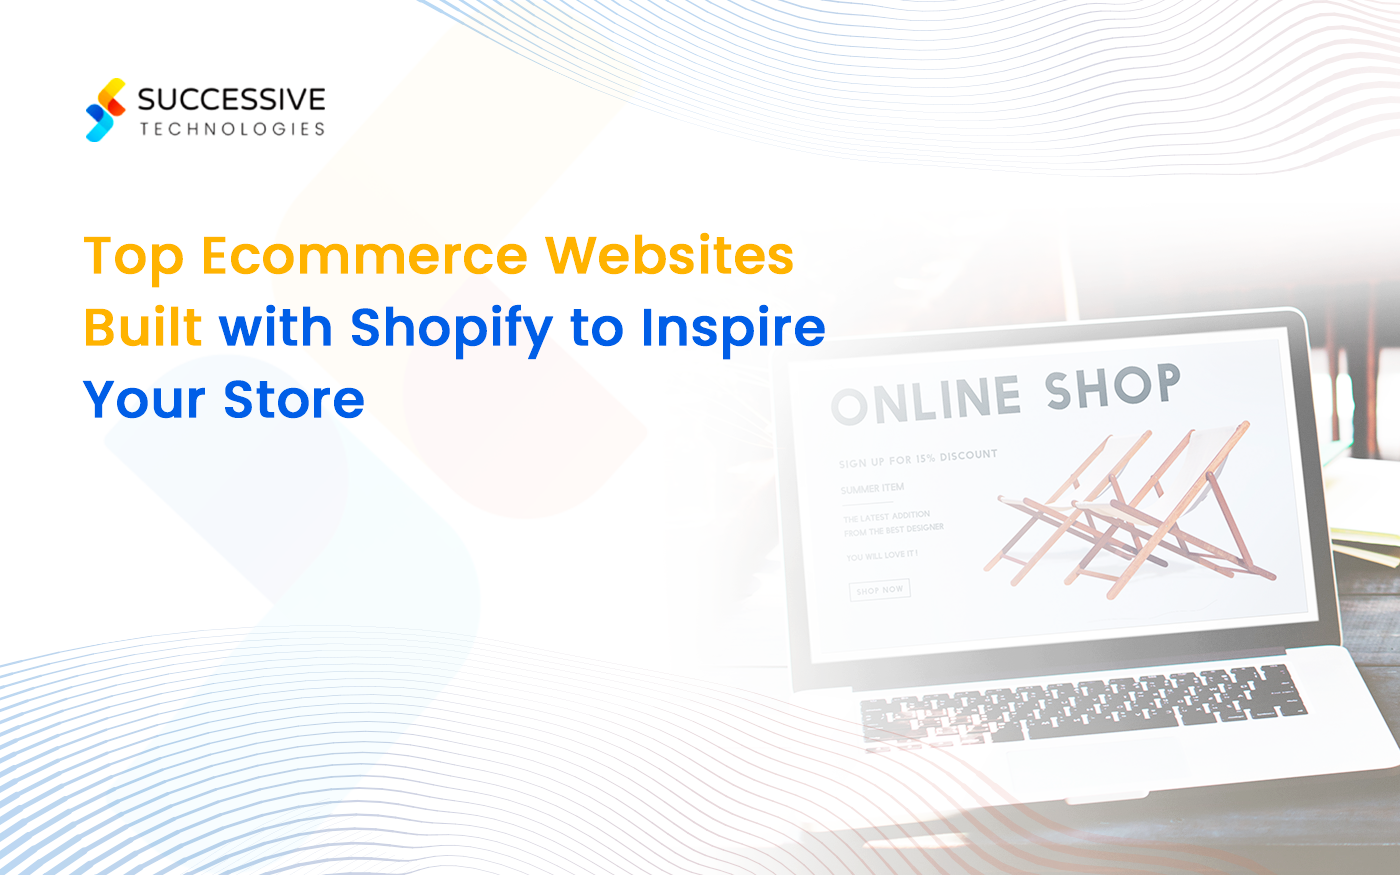 Top Ecommerce Websites Built with Shopify to Inspire Your Store